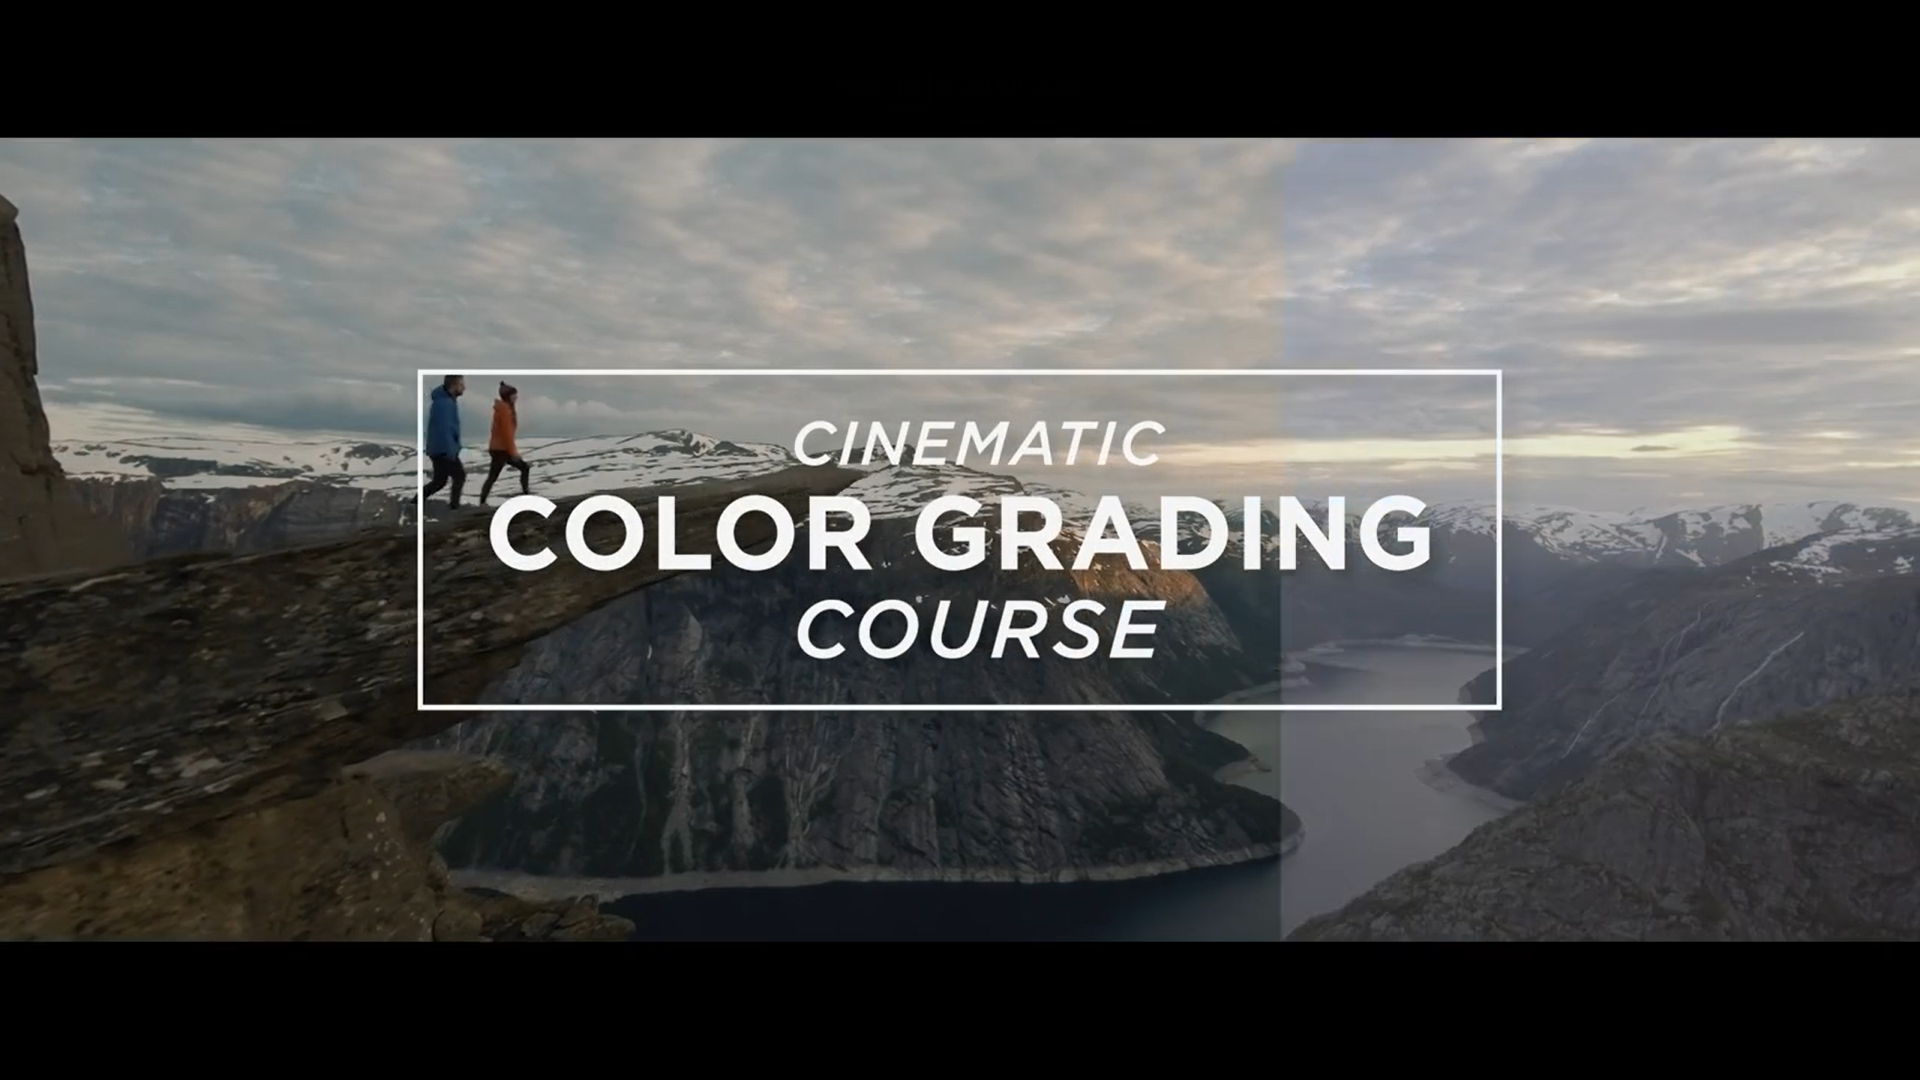 Cinematic Color Grading Making your Videos Come Alive